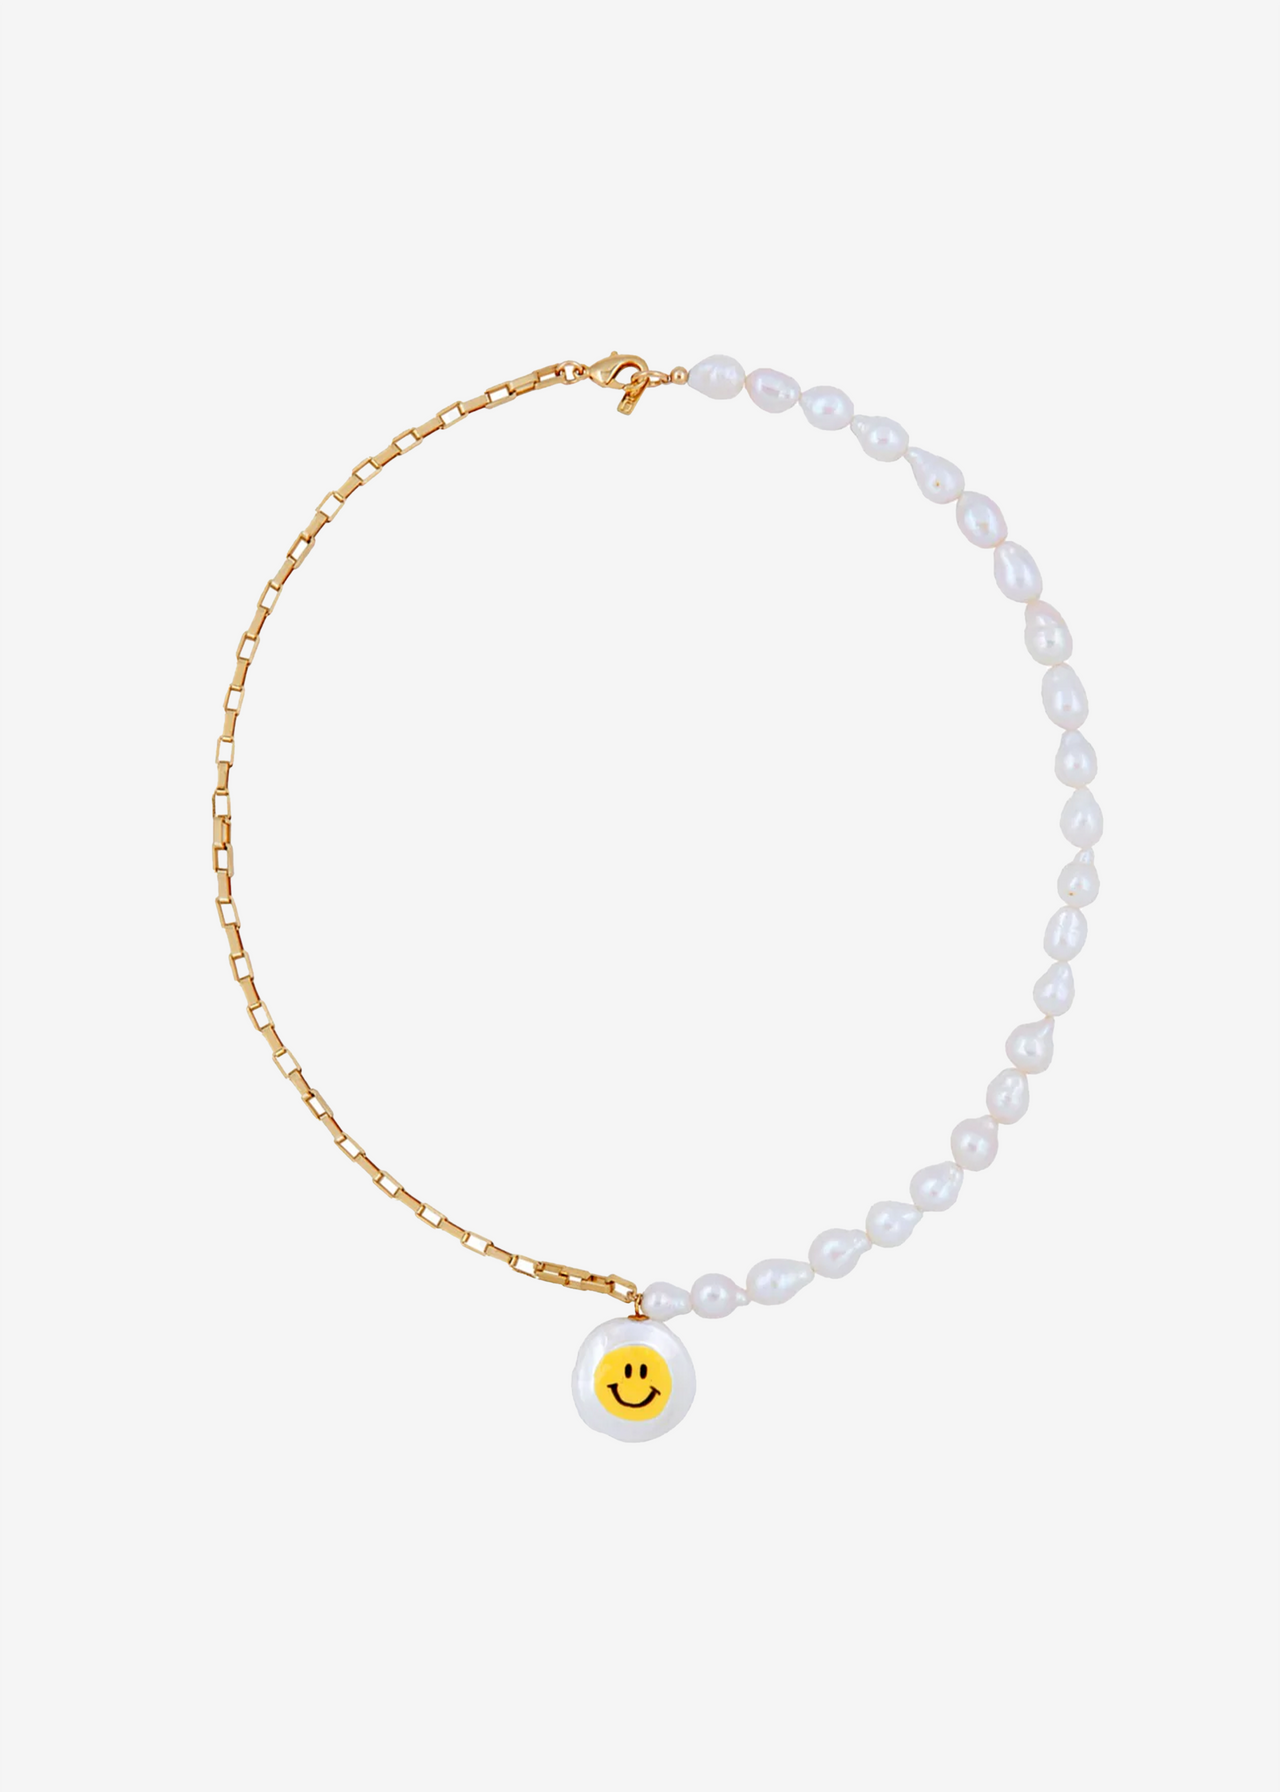 All Smiles Necklace 18" by Martha Calvo